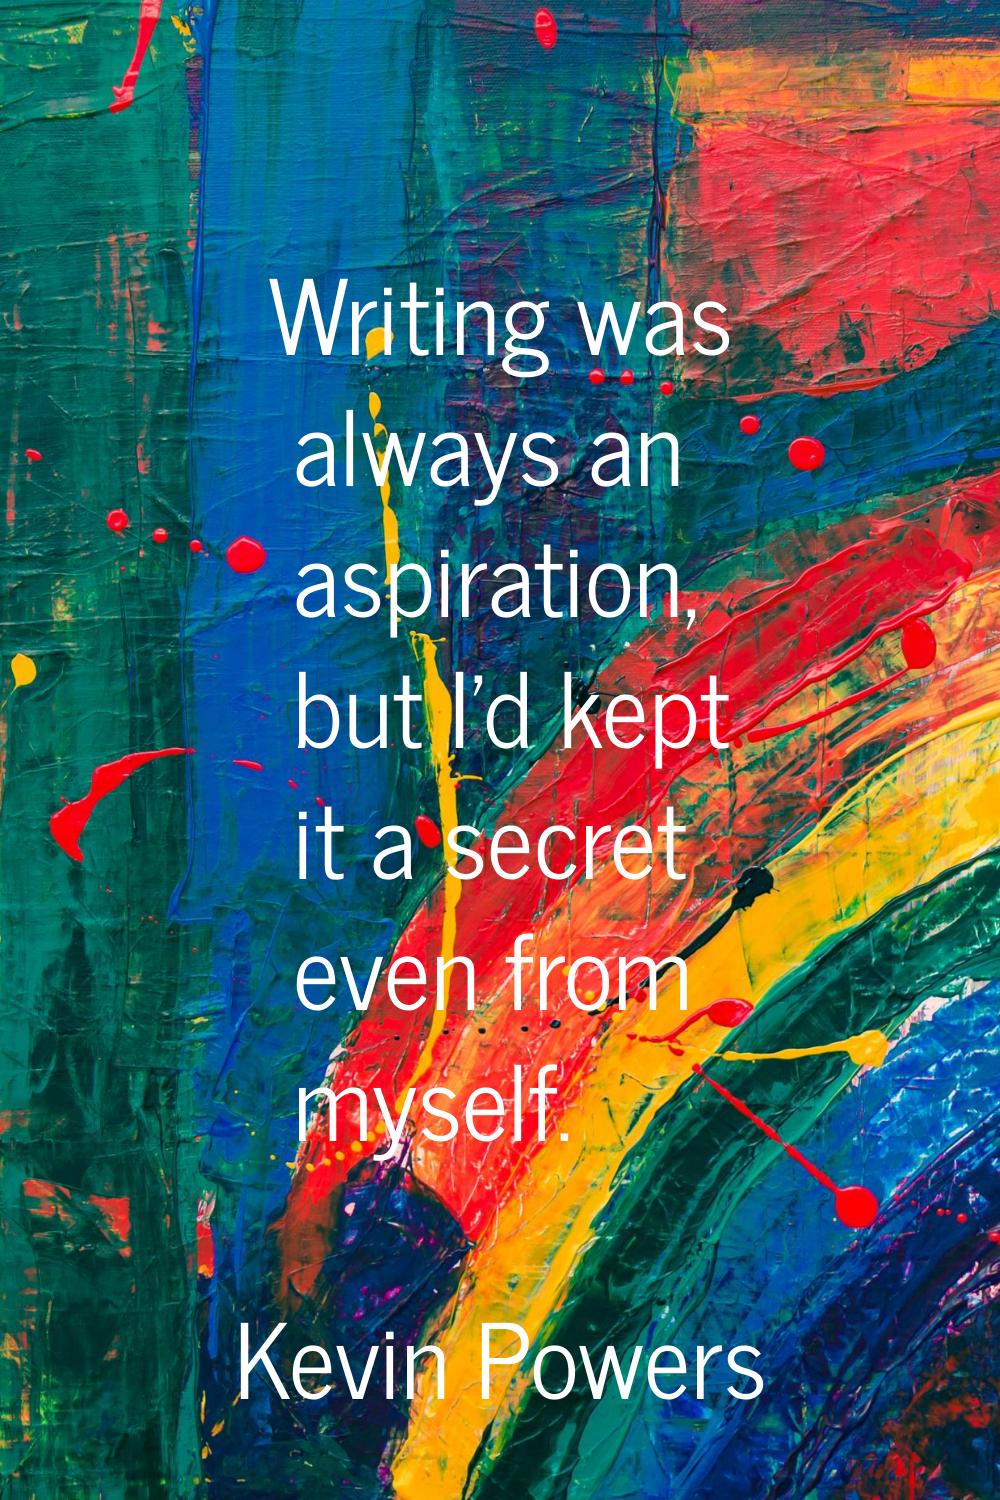 Writing was always an aspiration, but I'd kept it a secret even from myself.